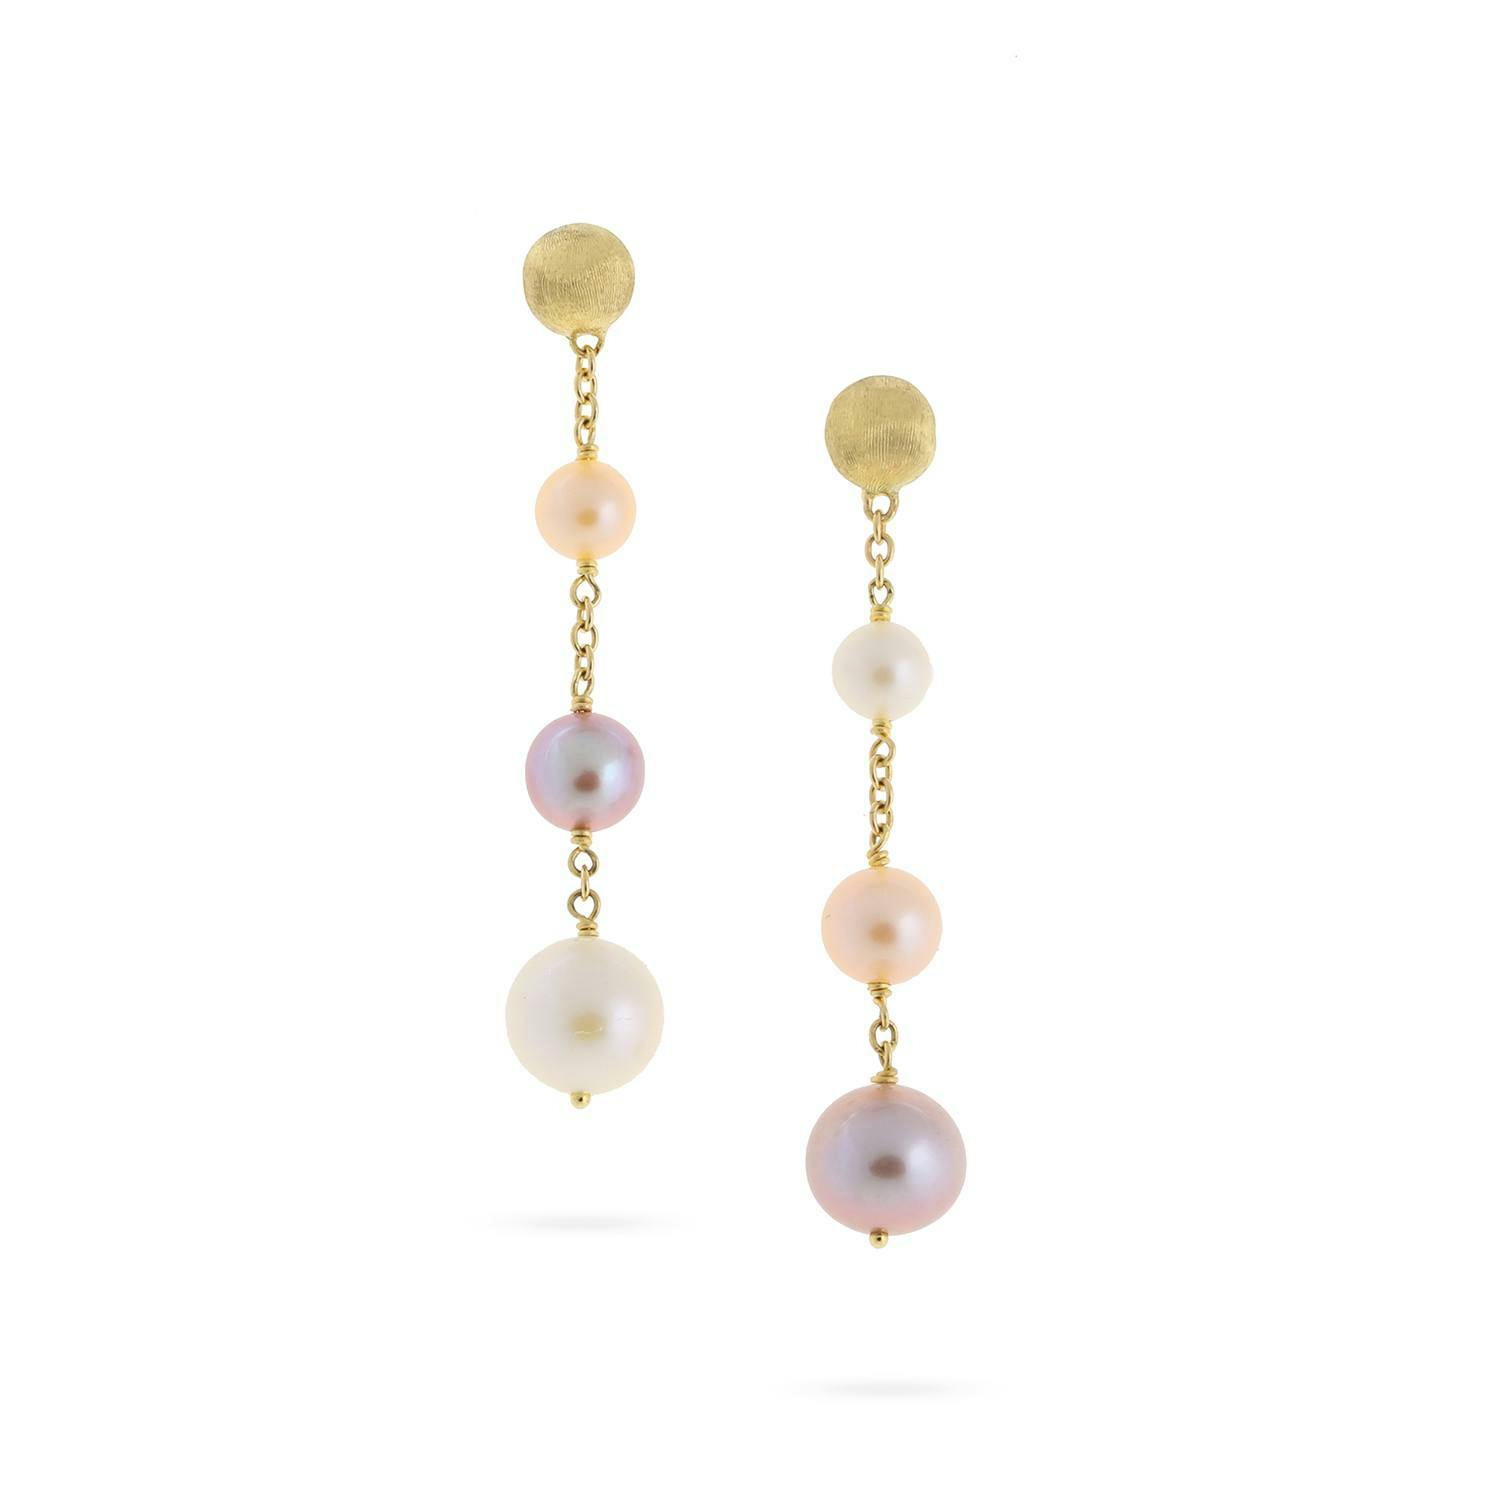 Marco Bicego Africa Yellow Gold & Multi-Colored Pearl Drop Earrings